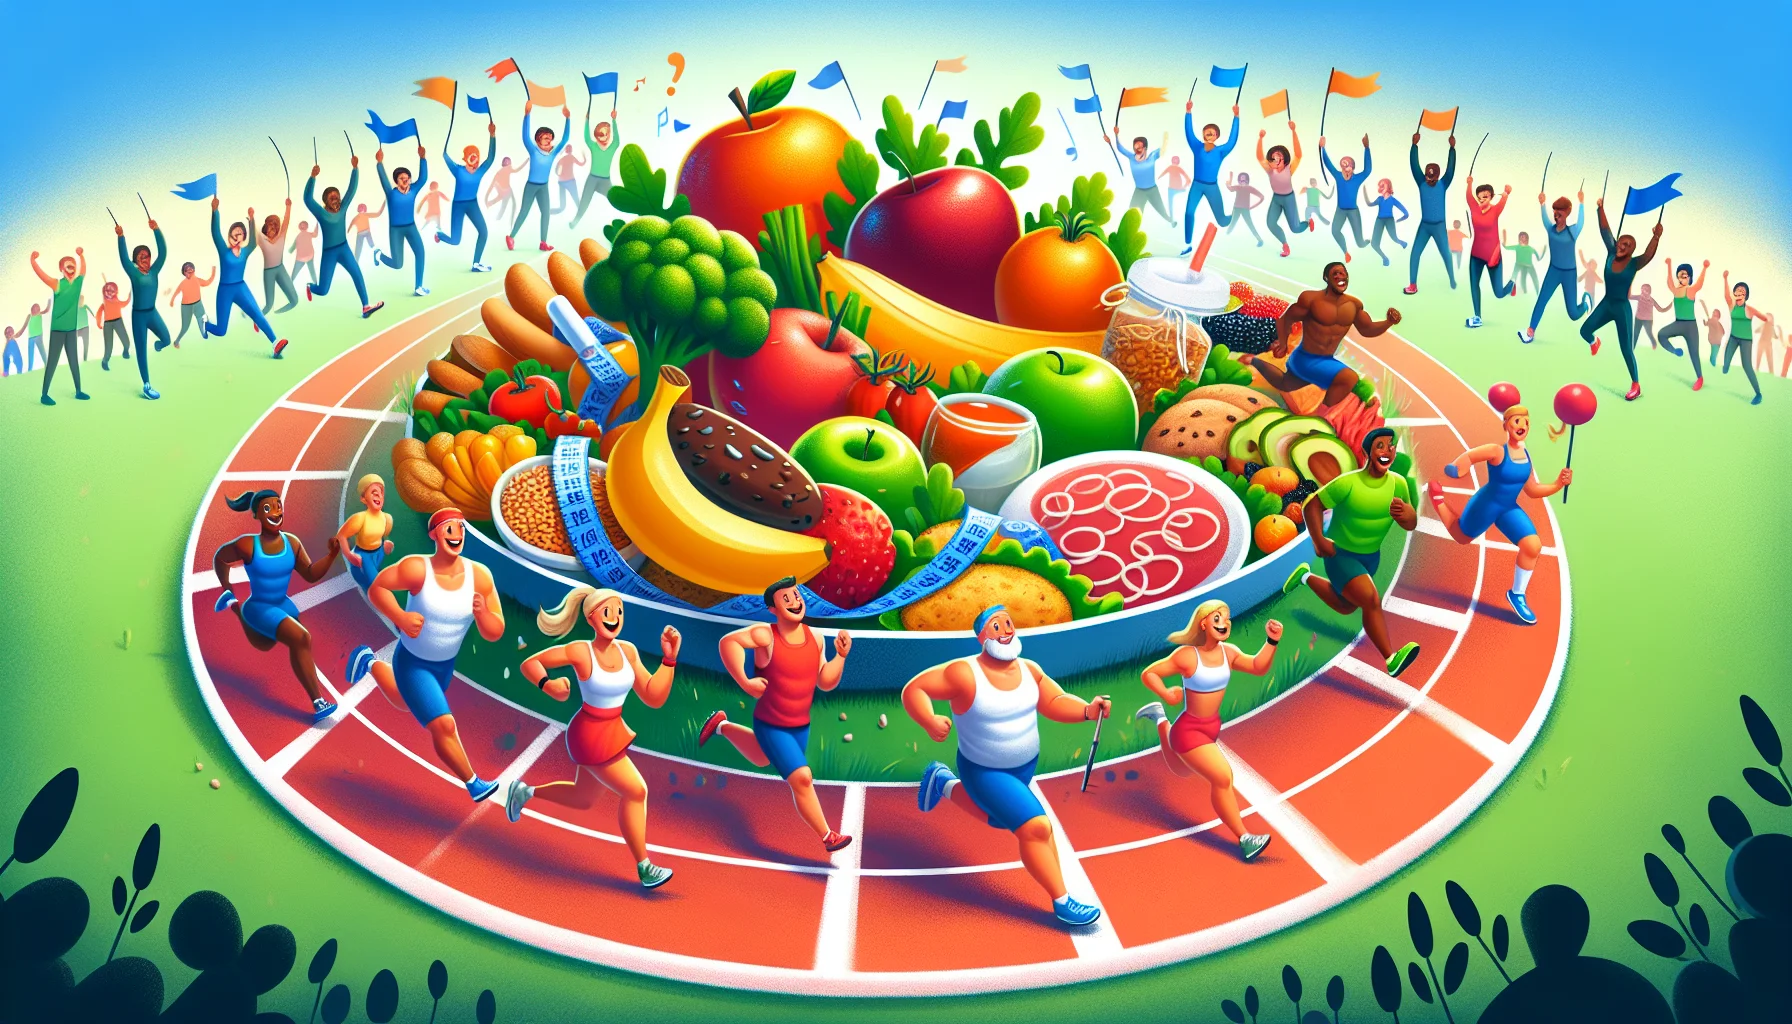 Create a fun, vibrant illustration for type 2 diabetes management using diet and exercise. The scene unfolding is this: A group of fresh fruits and vegetables, personified, are energetically jogging around a large, beautifully prepared salad plate, as if it's a running track. On the sidelines, cheerleader-esque whole grains, lean meat, fish and other diabetic-friendly foods are showing their support. This scene symbolizes a dynamic, balanced diet which swirls around exercise, mirroring its importance in diabetes management. Variations of people in the background, of different genders and descents, are joyfully joining in, urging viewers to lead an active, healthy lifestyle.